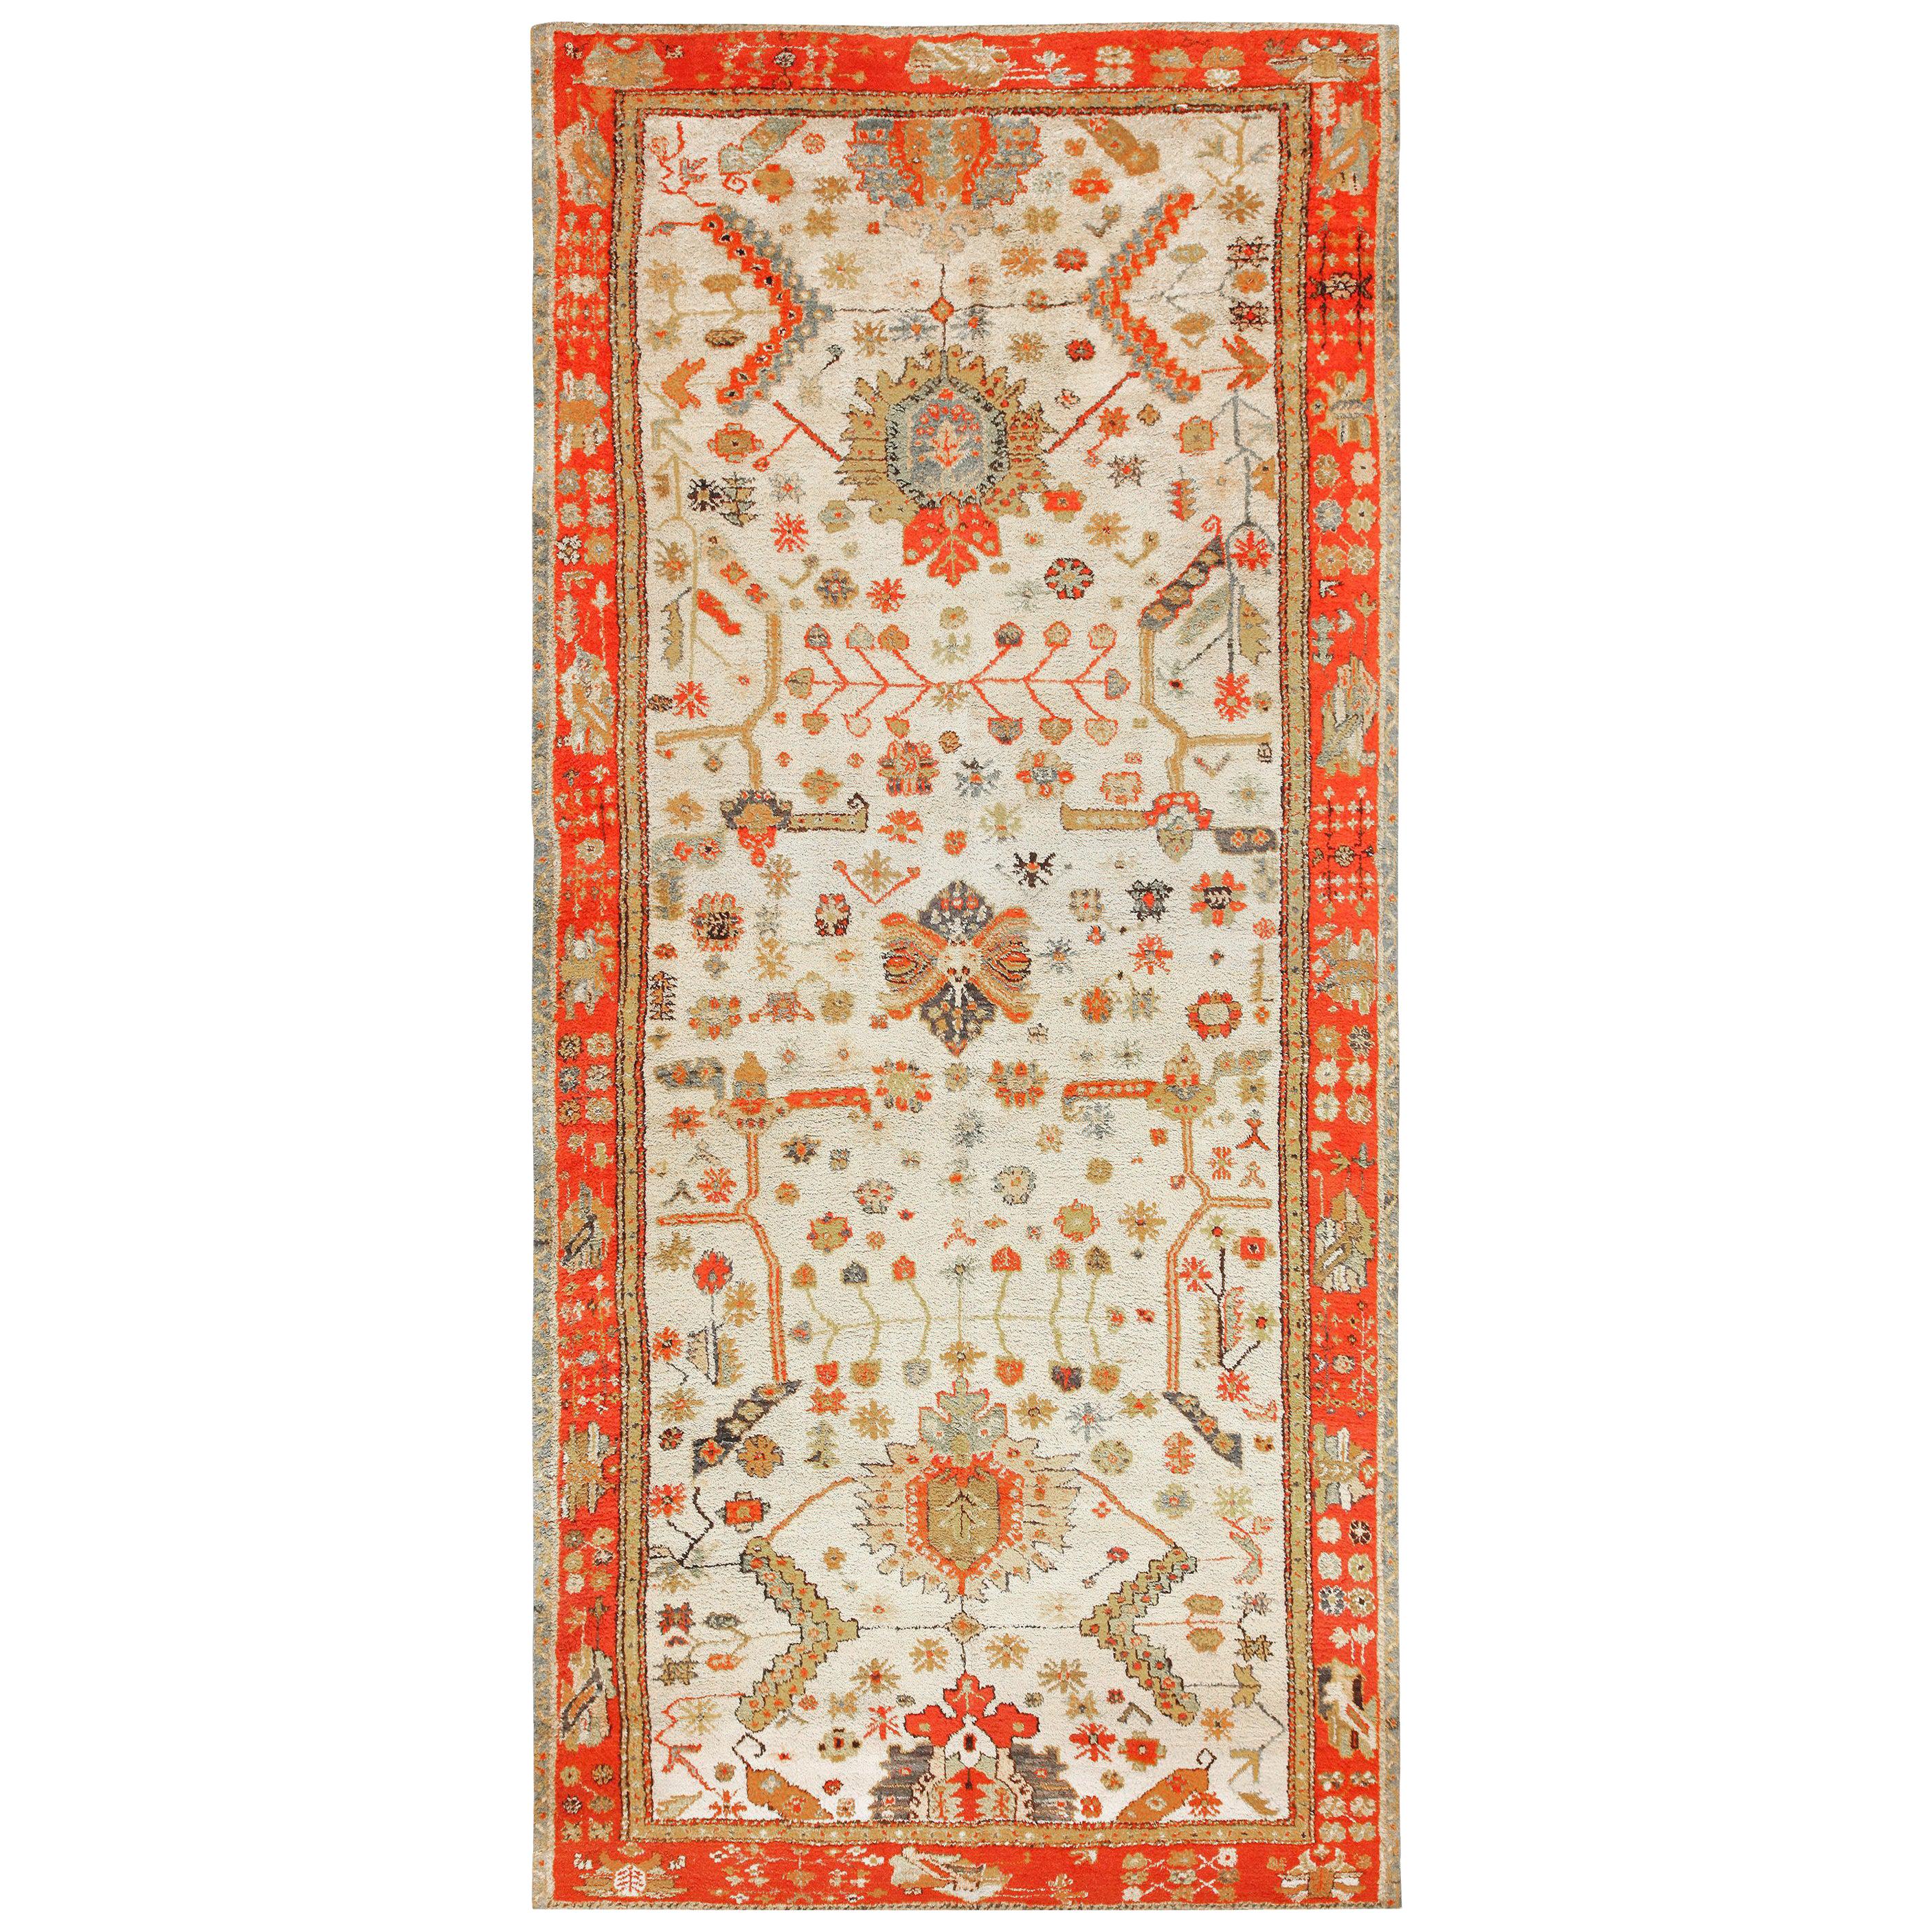 Nazmiyal Collection Antique Turkish Oushak Rug. Size: 8 ft 4 in x 17 ft 3 in 